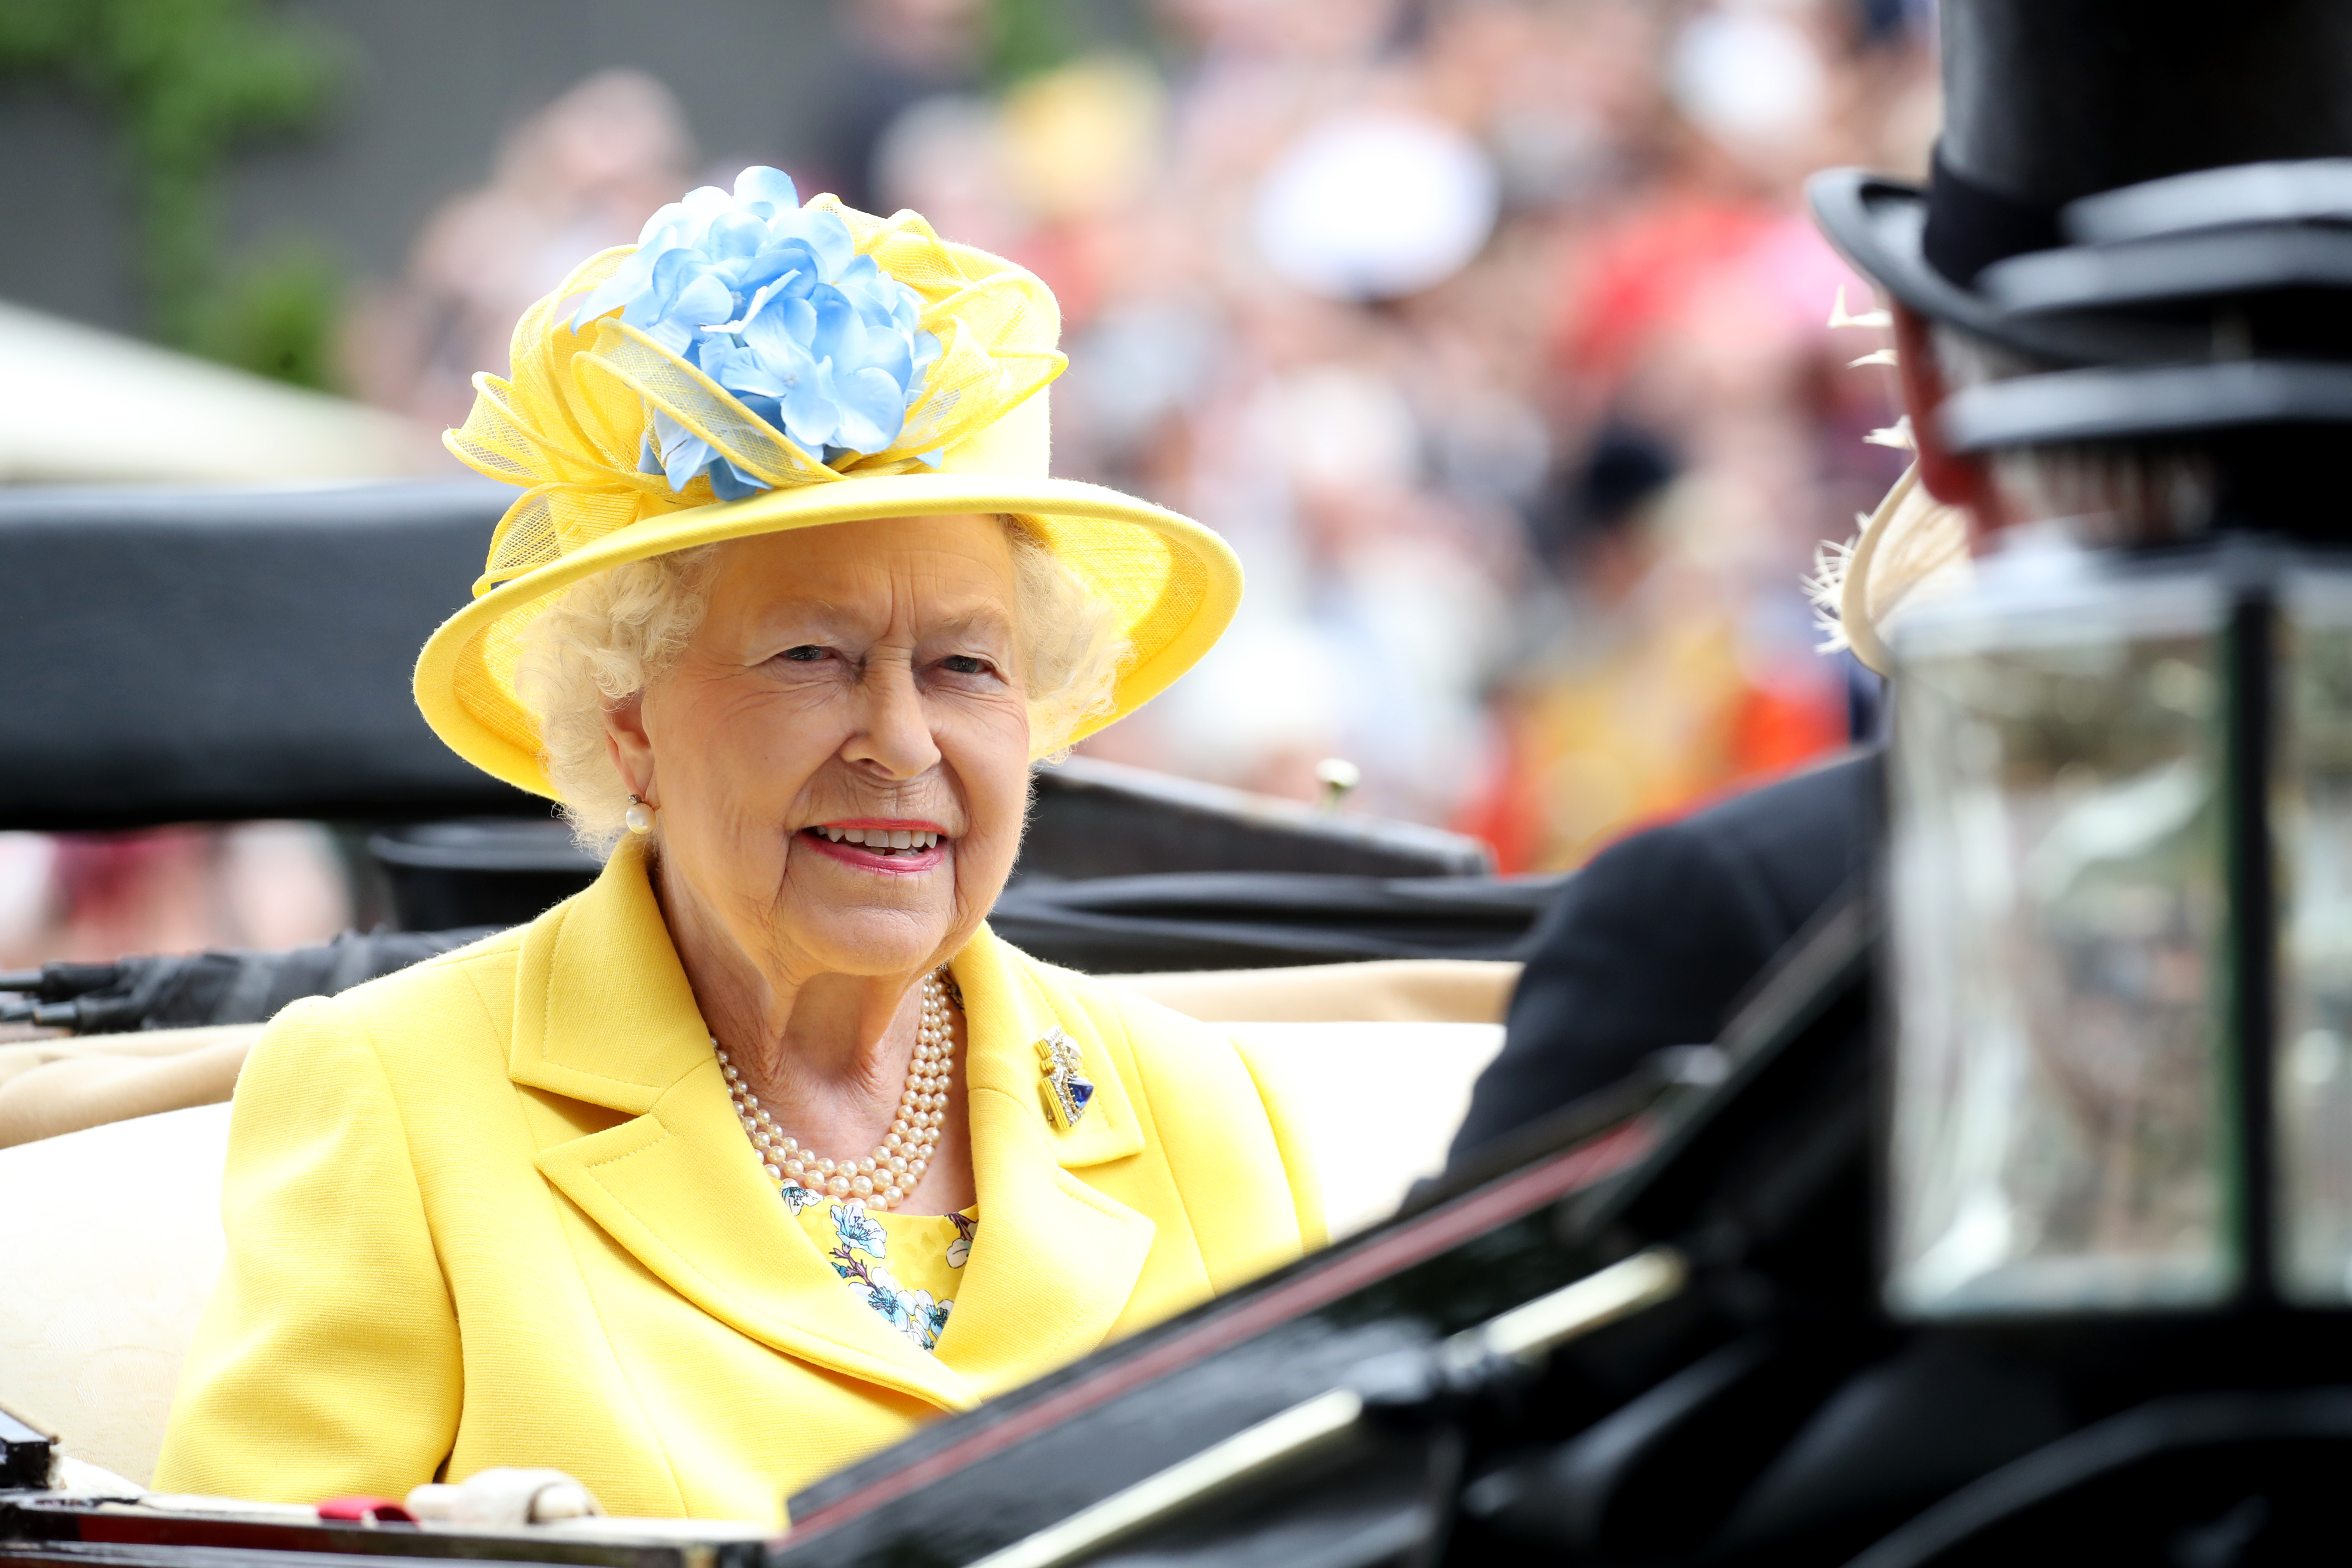 The Queen at Royal Ascot 2018